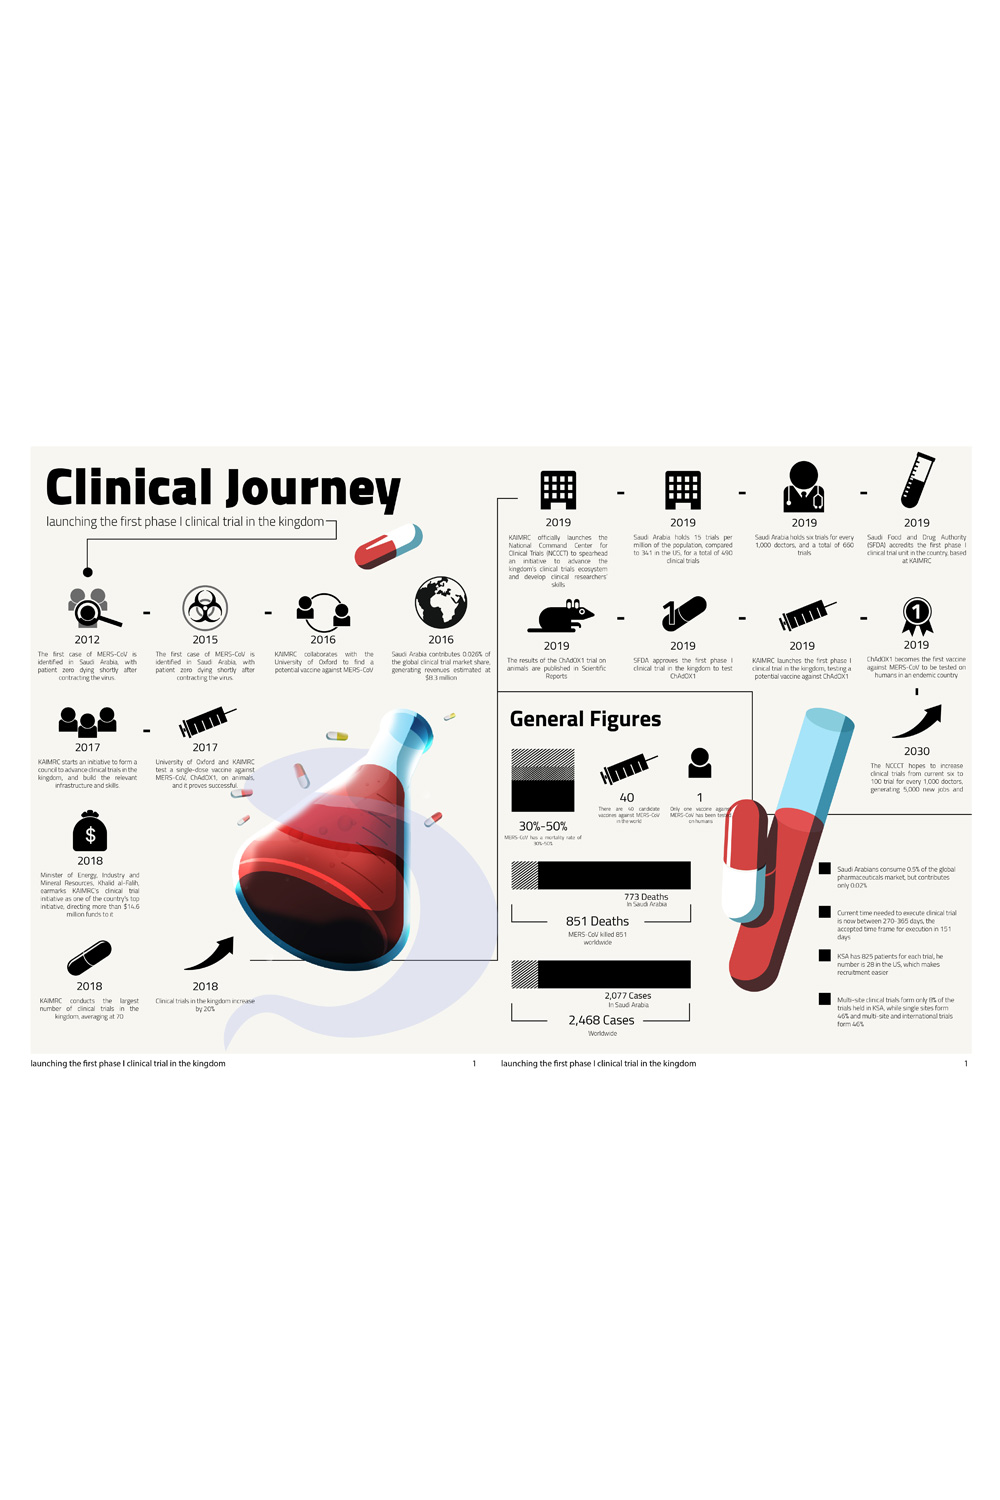 The journey to the first phase I clinical trial in Saudi Arabia